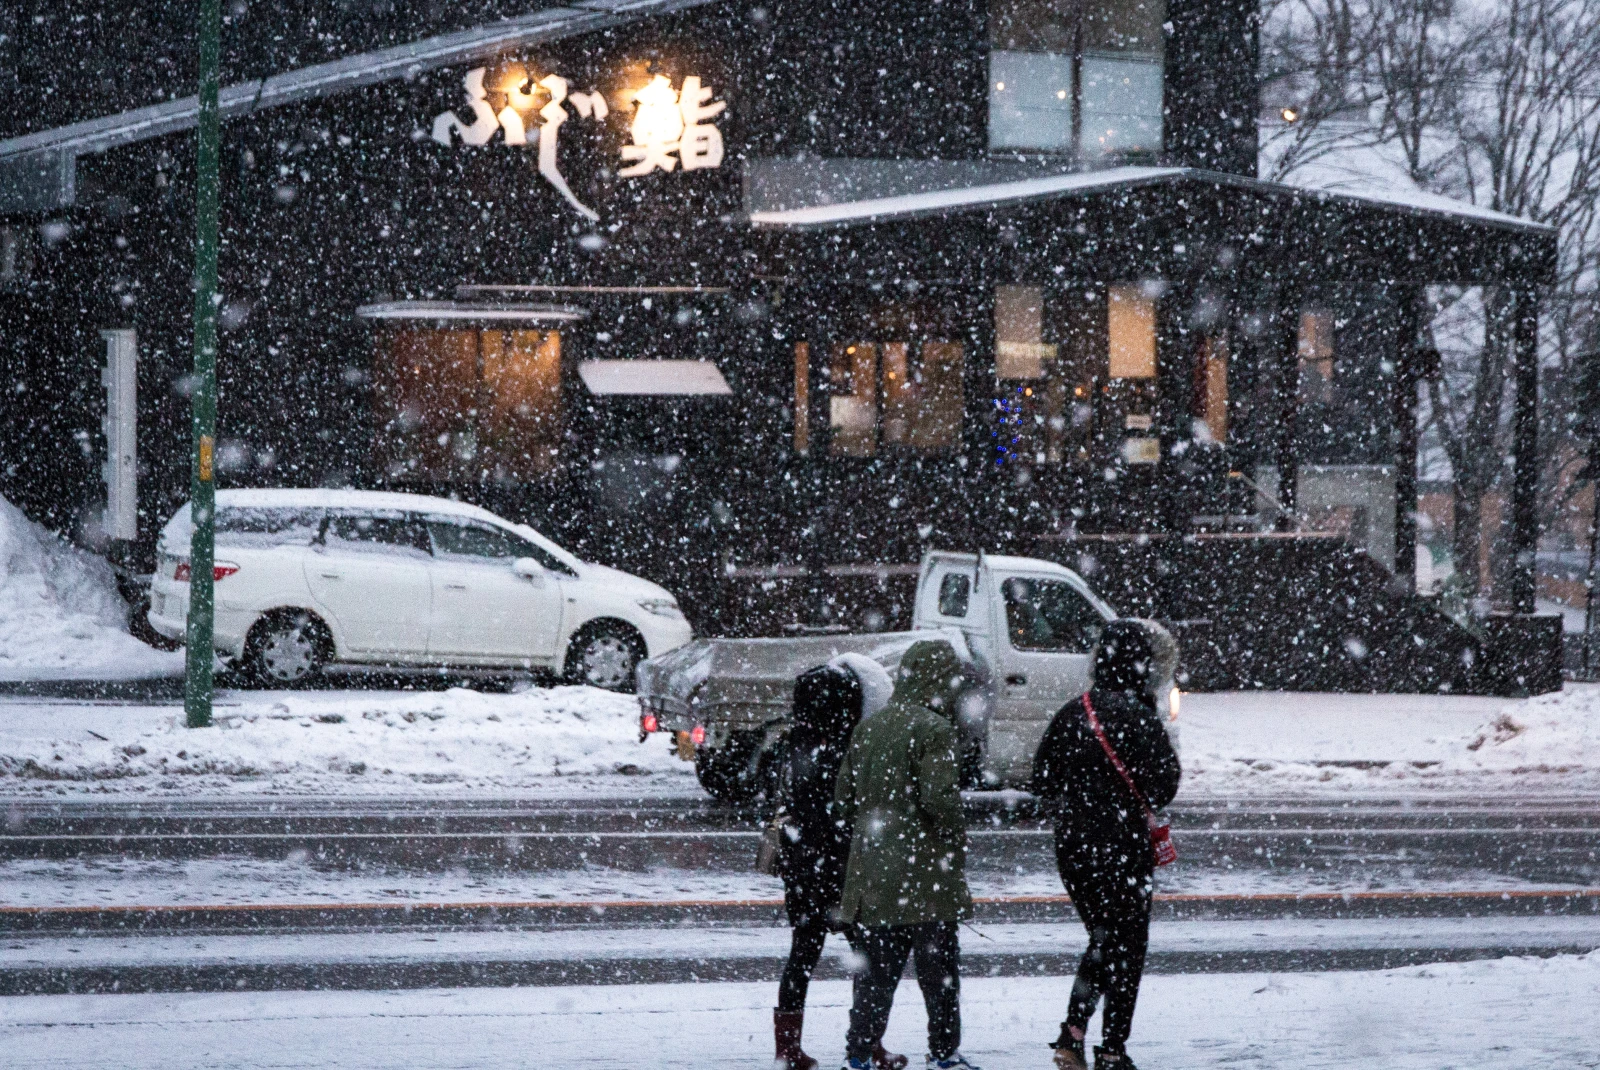 People walking on streets during snowstorm